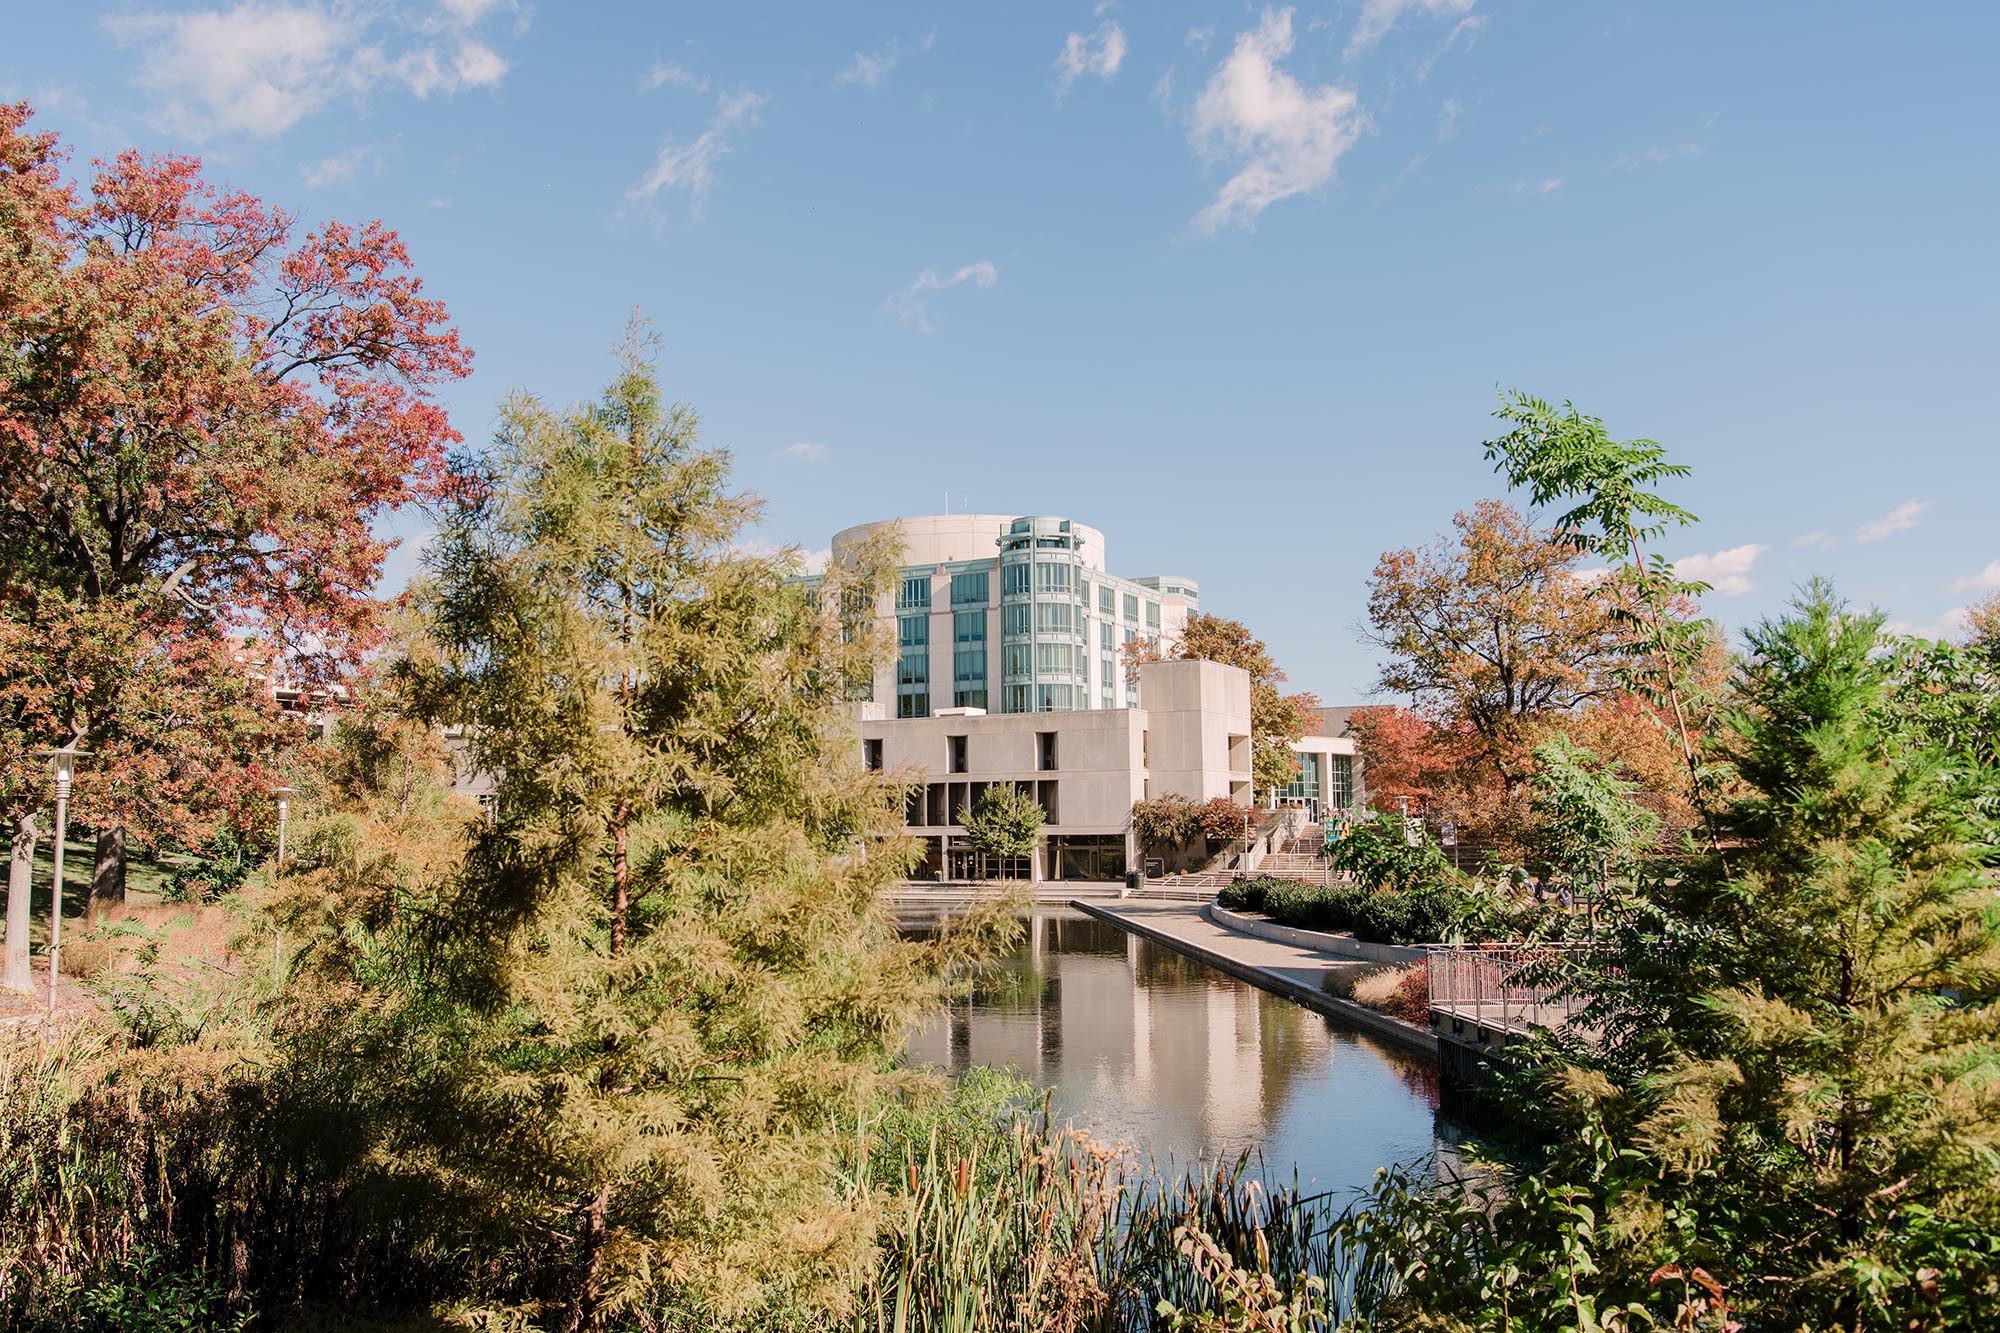 UMBC's campus in the fall, featuring the AOK Library and its reflection in a pond surrounded by red, yellow, and green trees.